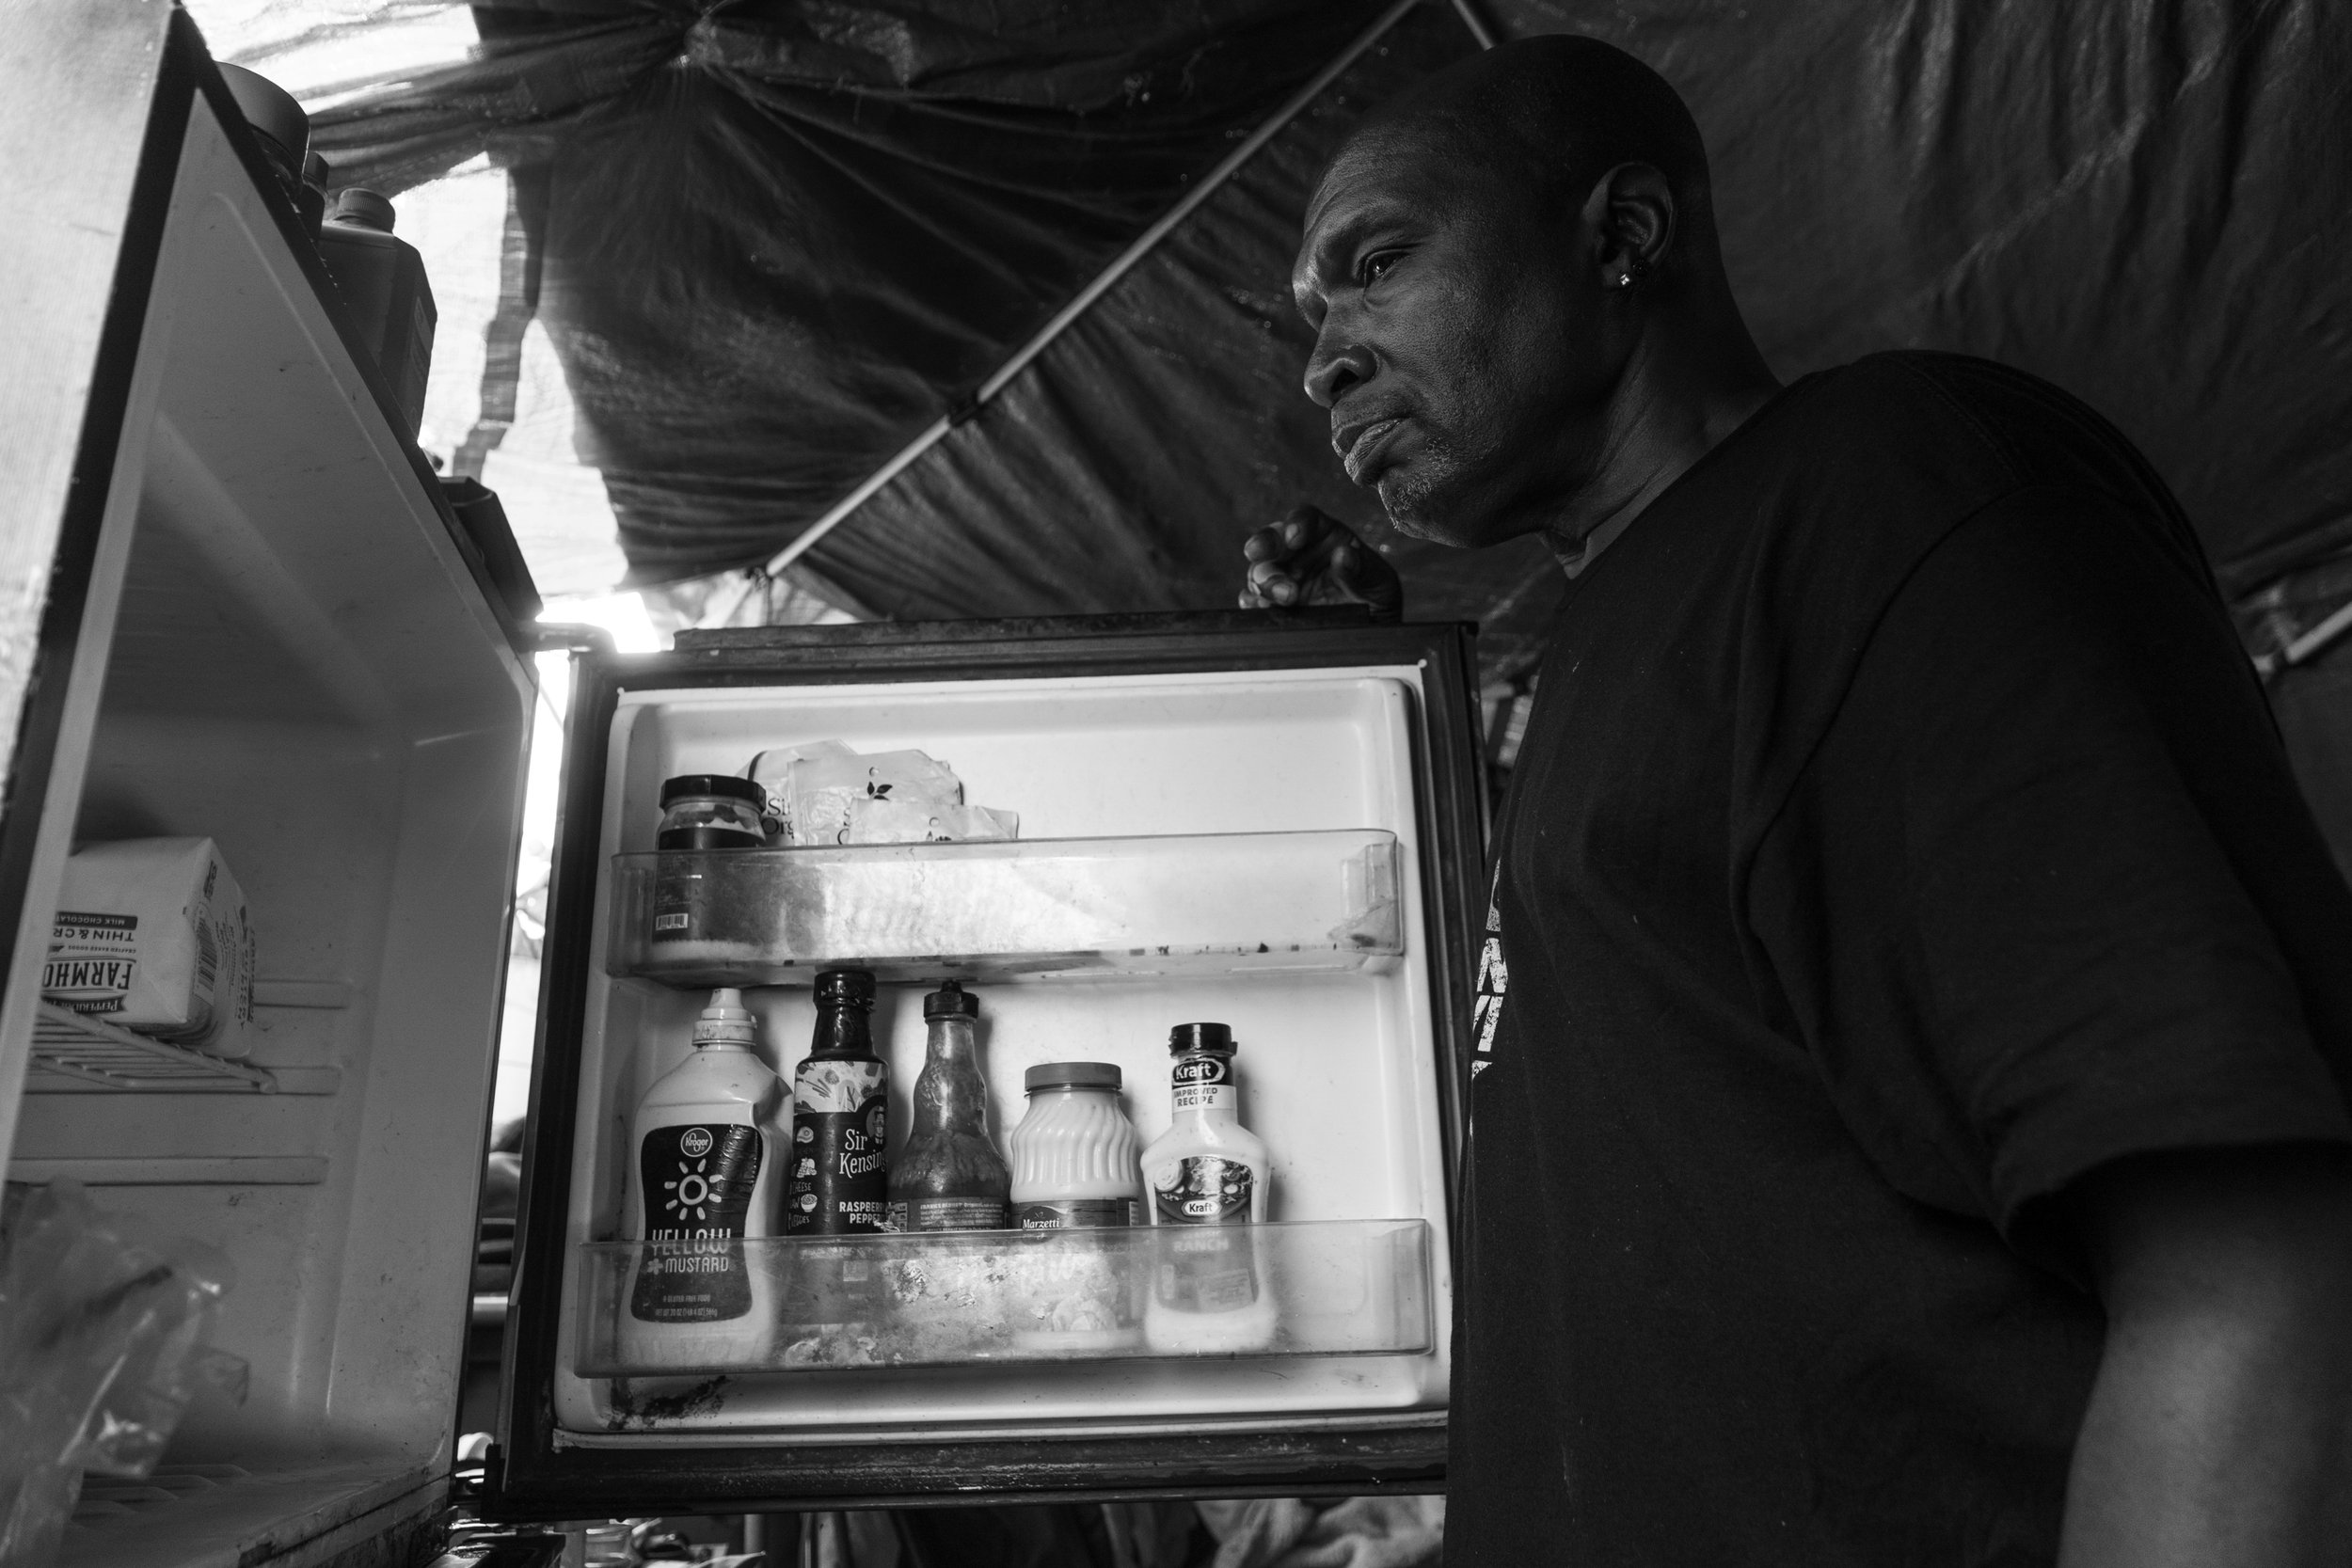  Derrick Thomas, who prefers to go by Hawk, is a barber living on Skid Row. The 65-year-old Louisiana native has called Skid Row home for the last seven years, previously serving time in jail and the military. He smokes and sells methenamine, sometim